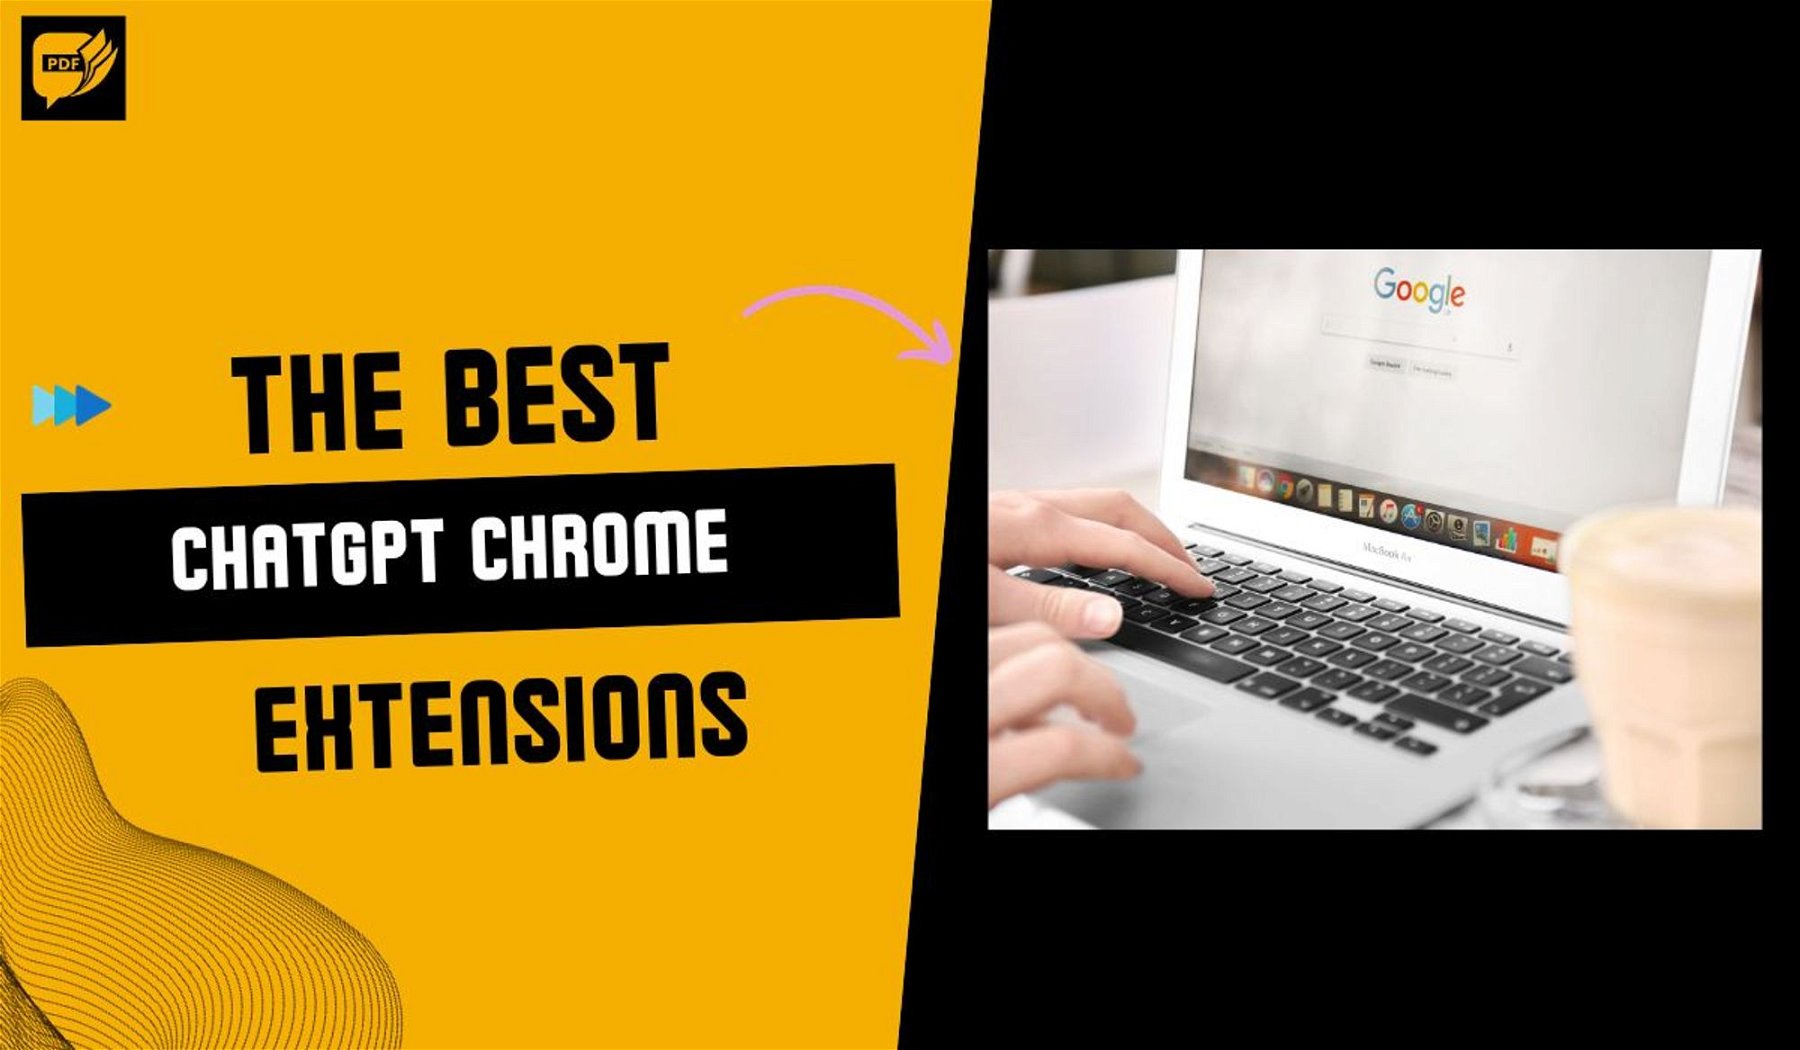 The 5 Best ChatGPT Chrome Extensions